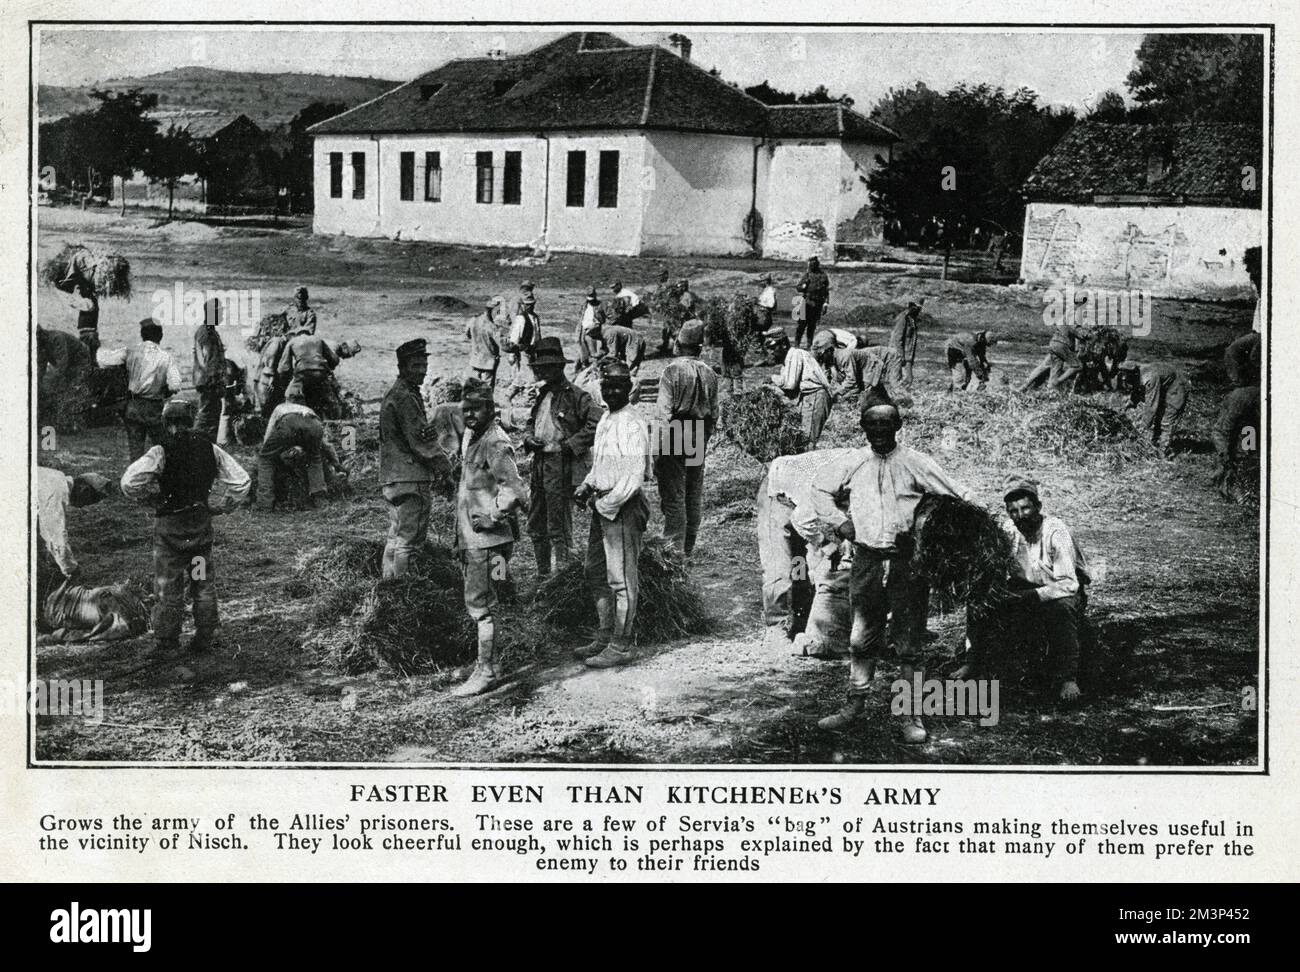 Austrian prisoners of war at work in a field in Nis (or Nish, or Nisch), Serbia, in the early stages of the First World War.       Date: September 1914 Stock Photo